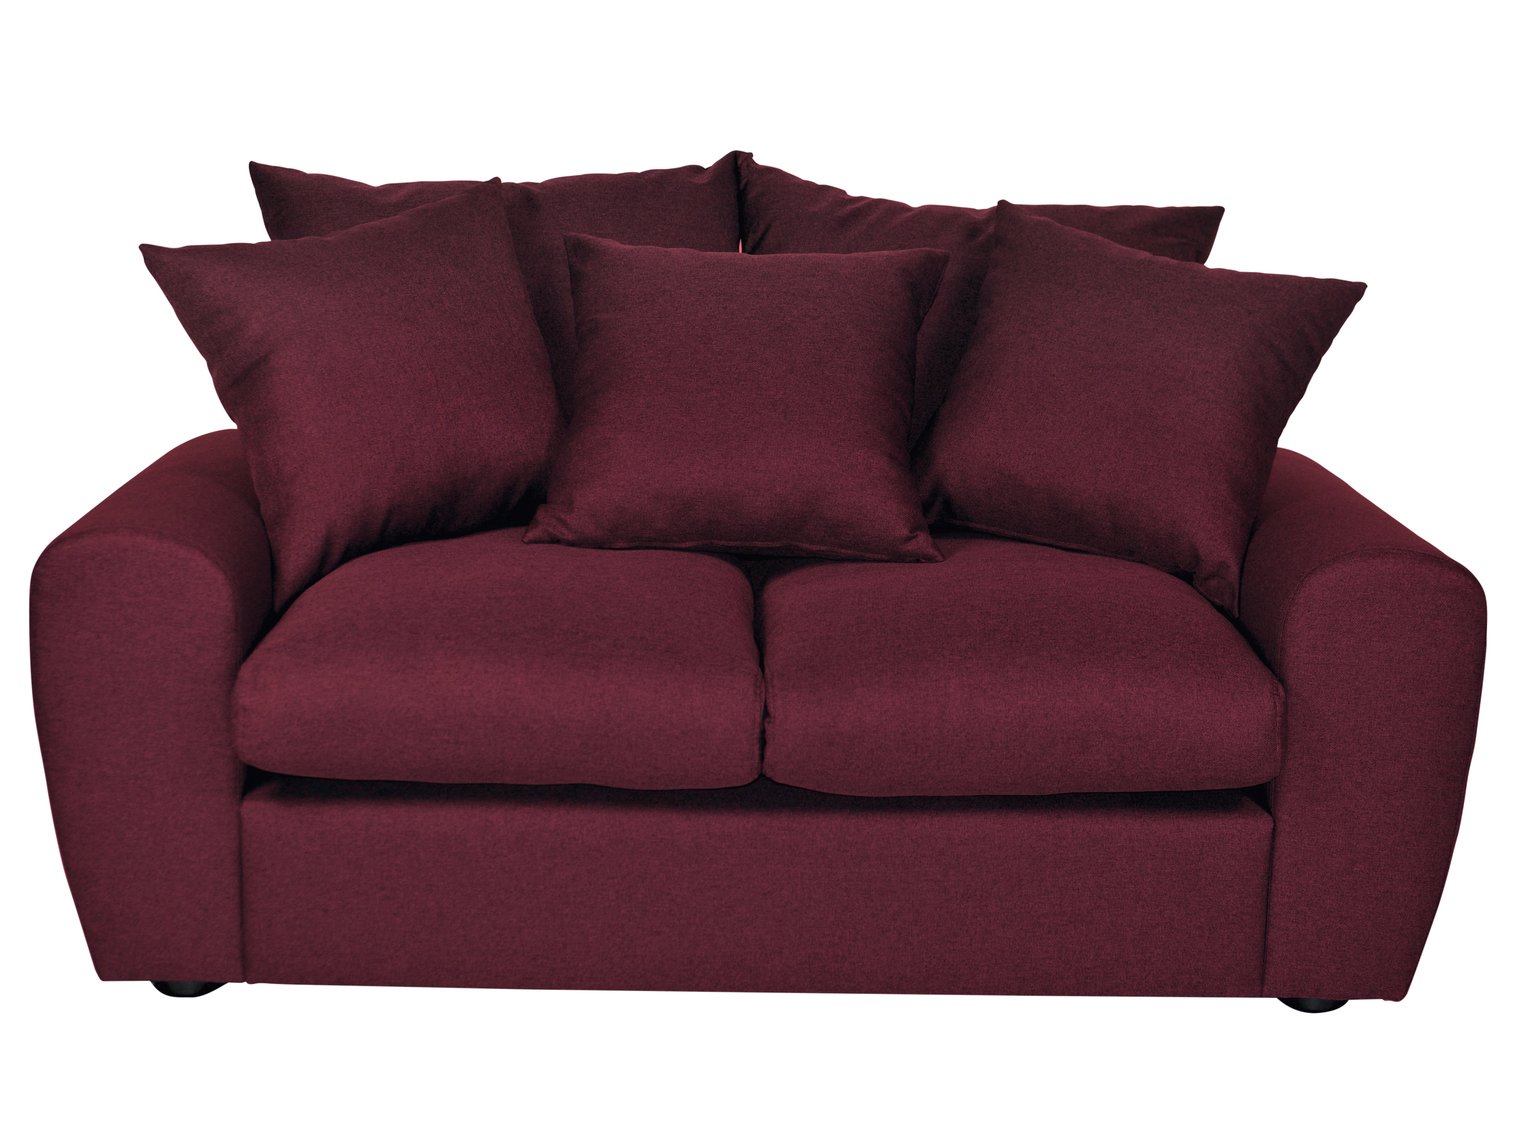 Argos Home Billow 2 Seater Fabric Sofa - Red